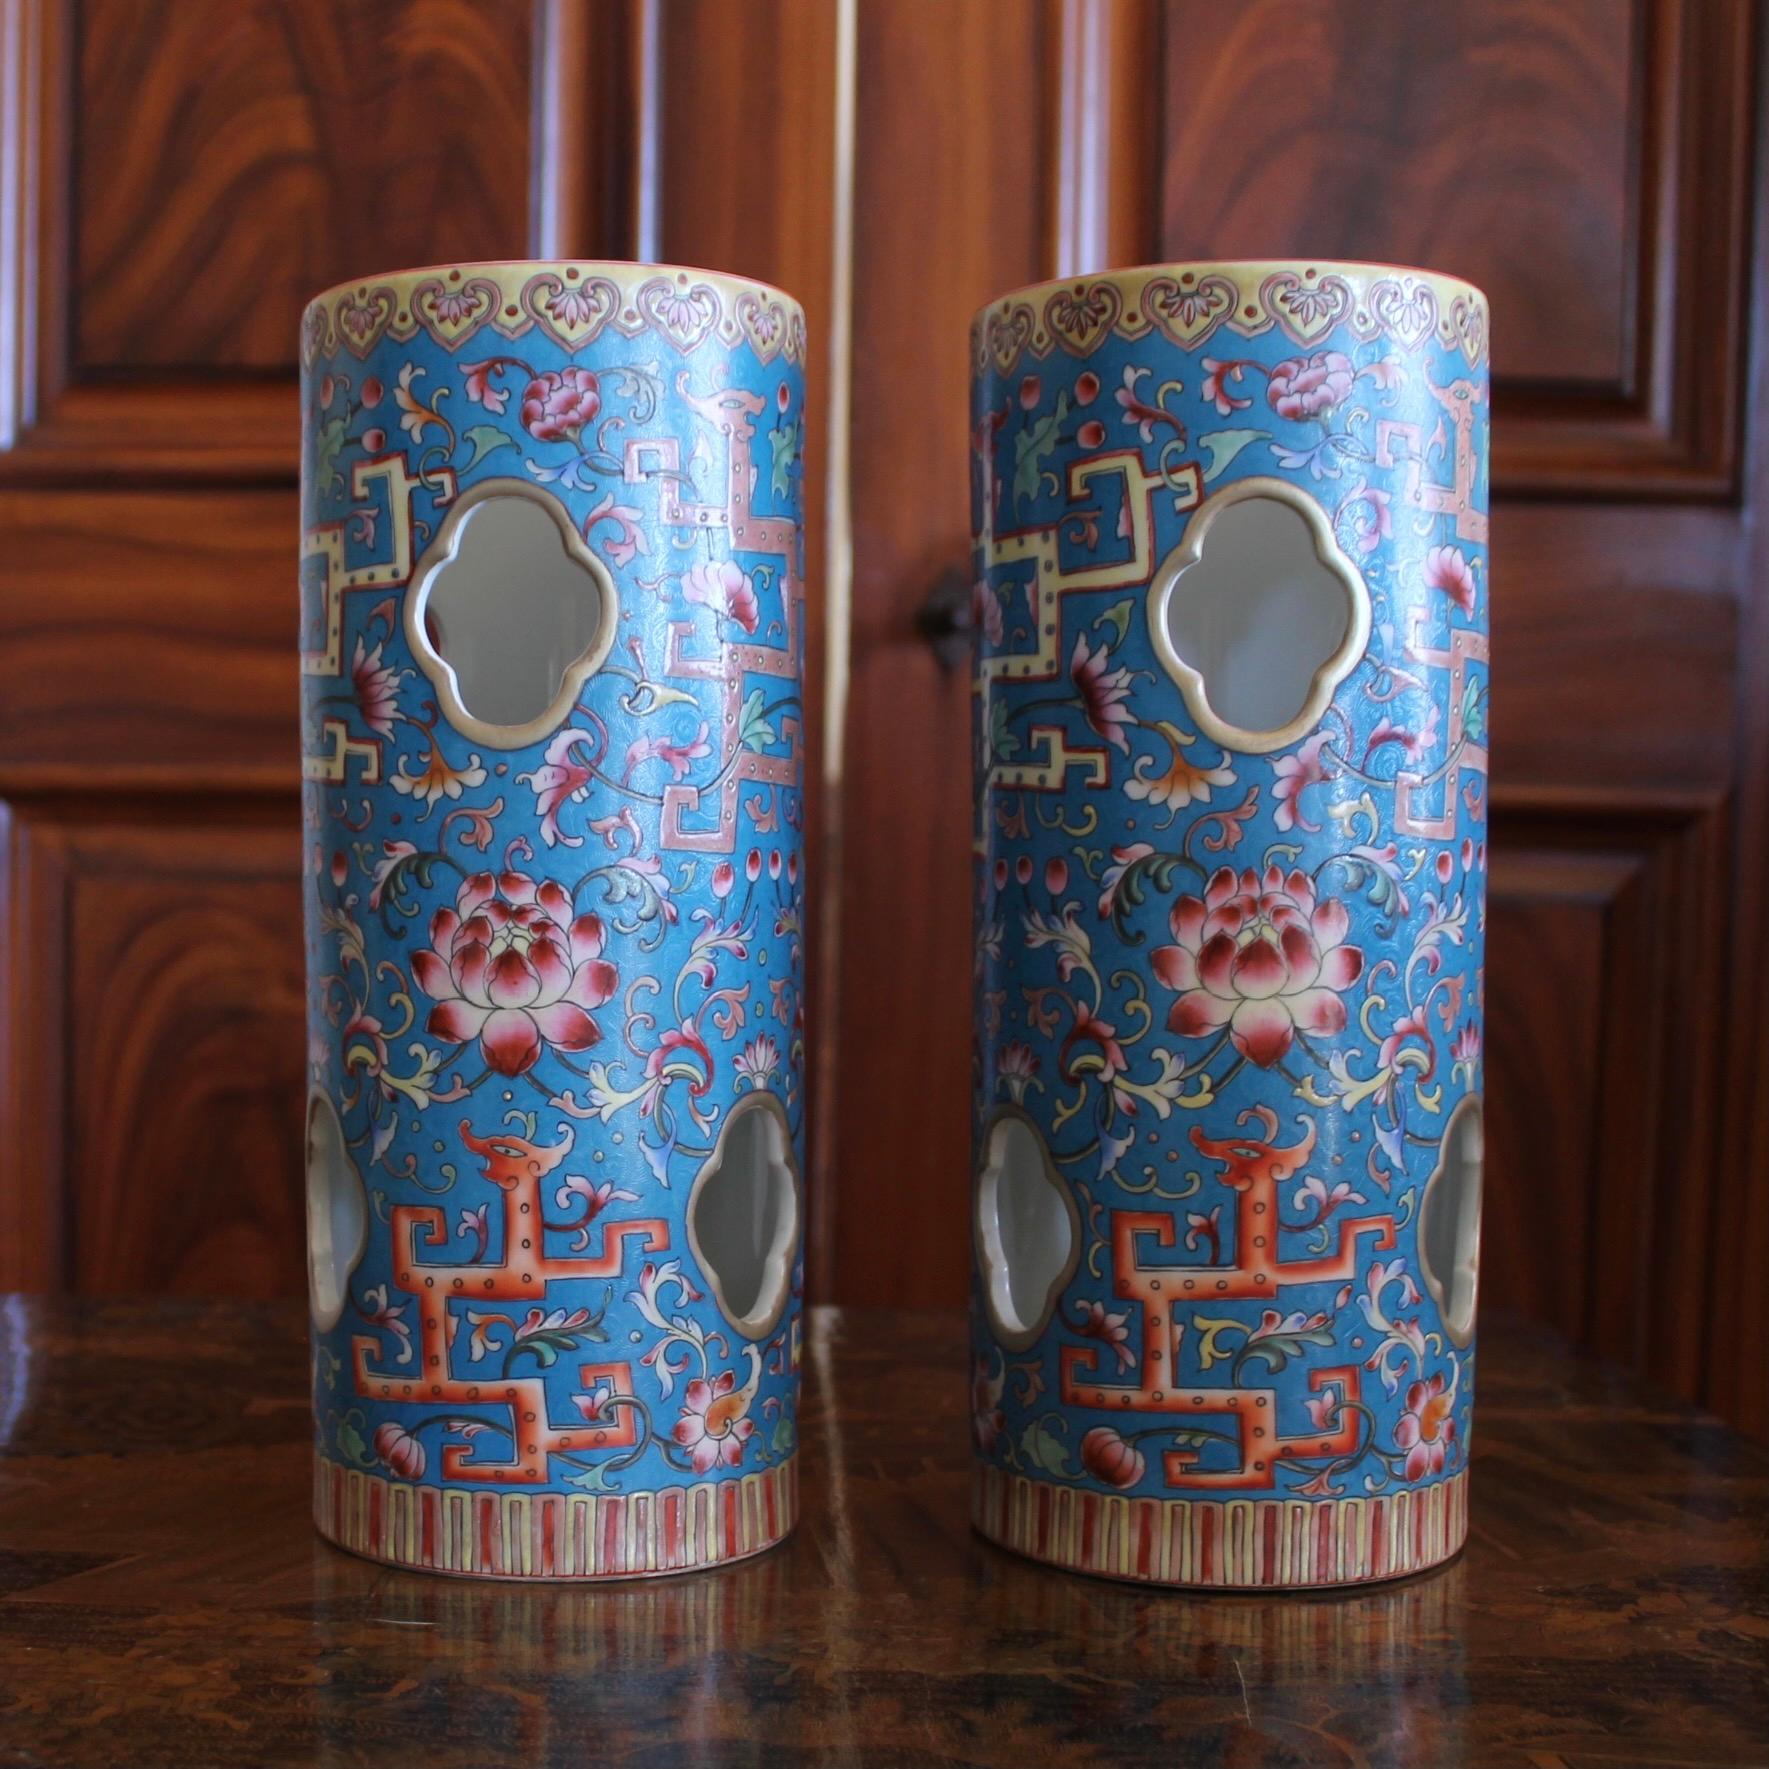 A beautiful pair of polychrome porcelain cylinders, with bright enameled zoomorphic and foliate decoration in orange, rose, green and yellow on a striking and rare patterned ground color: cerulean blue. Quatrefoil piercings are spaced around the